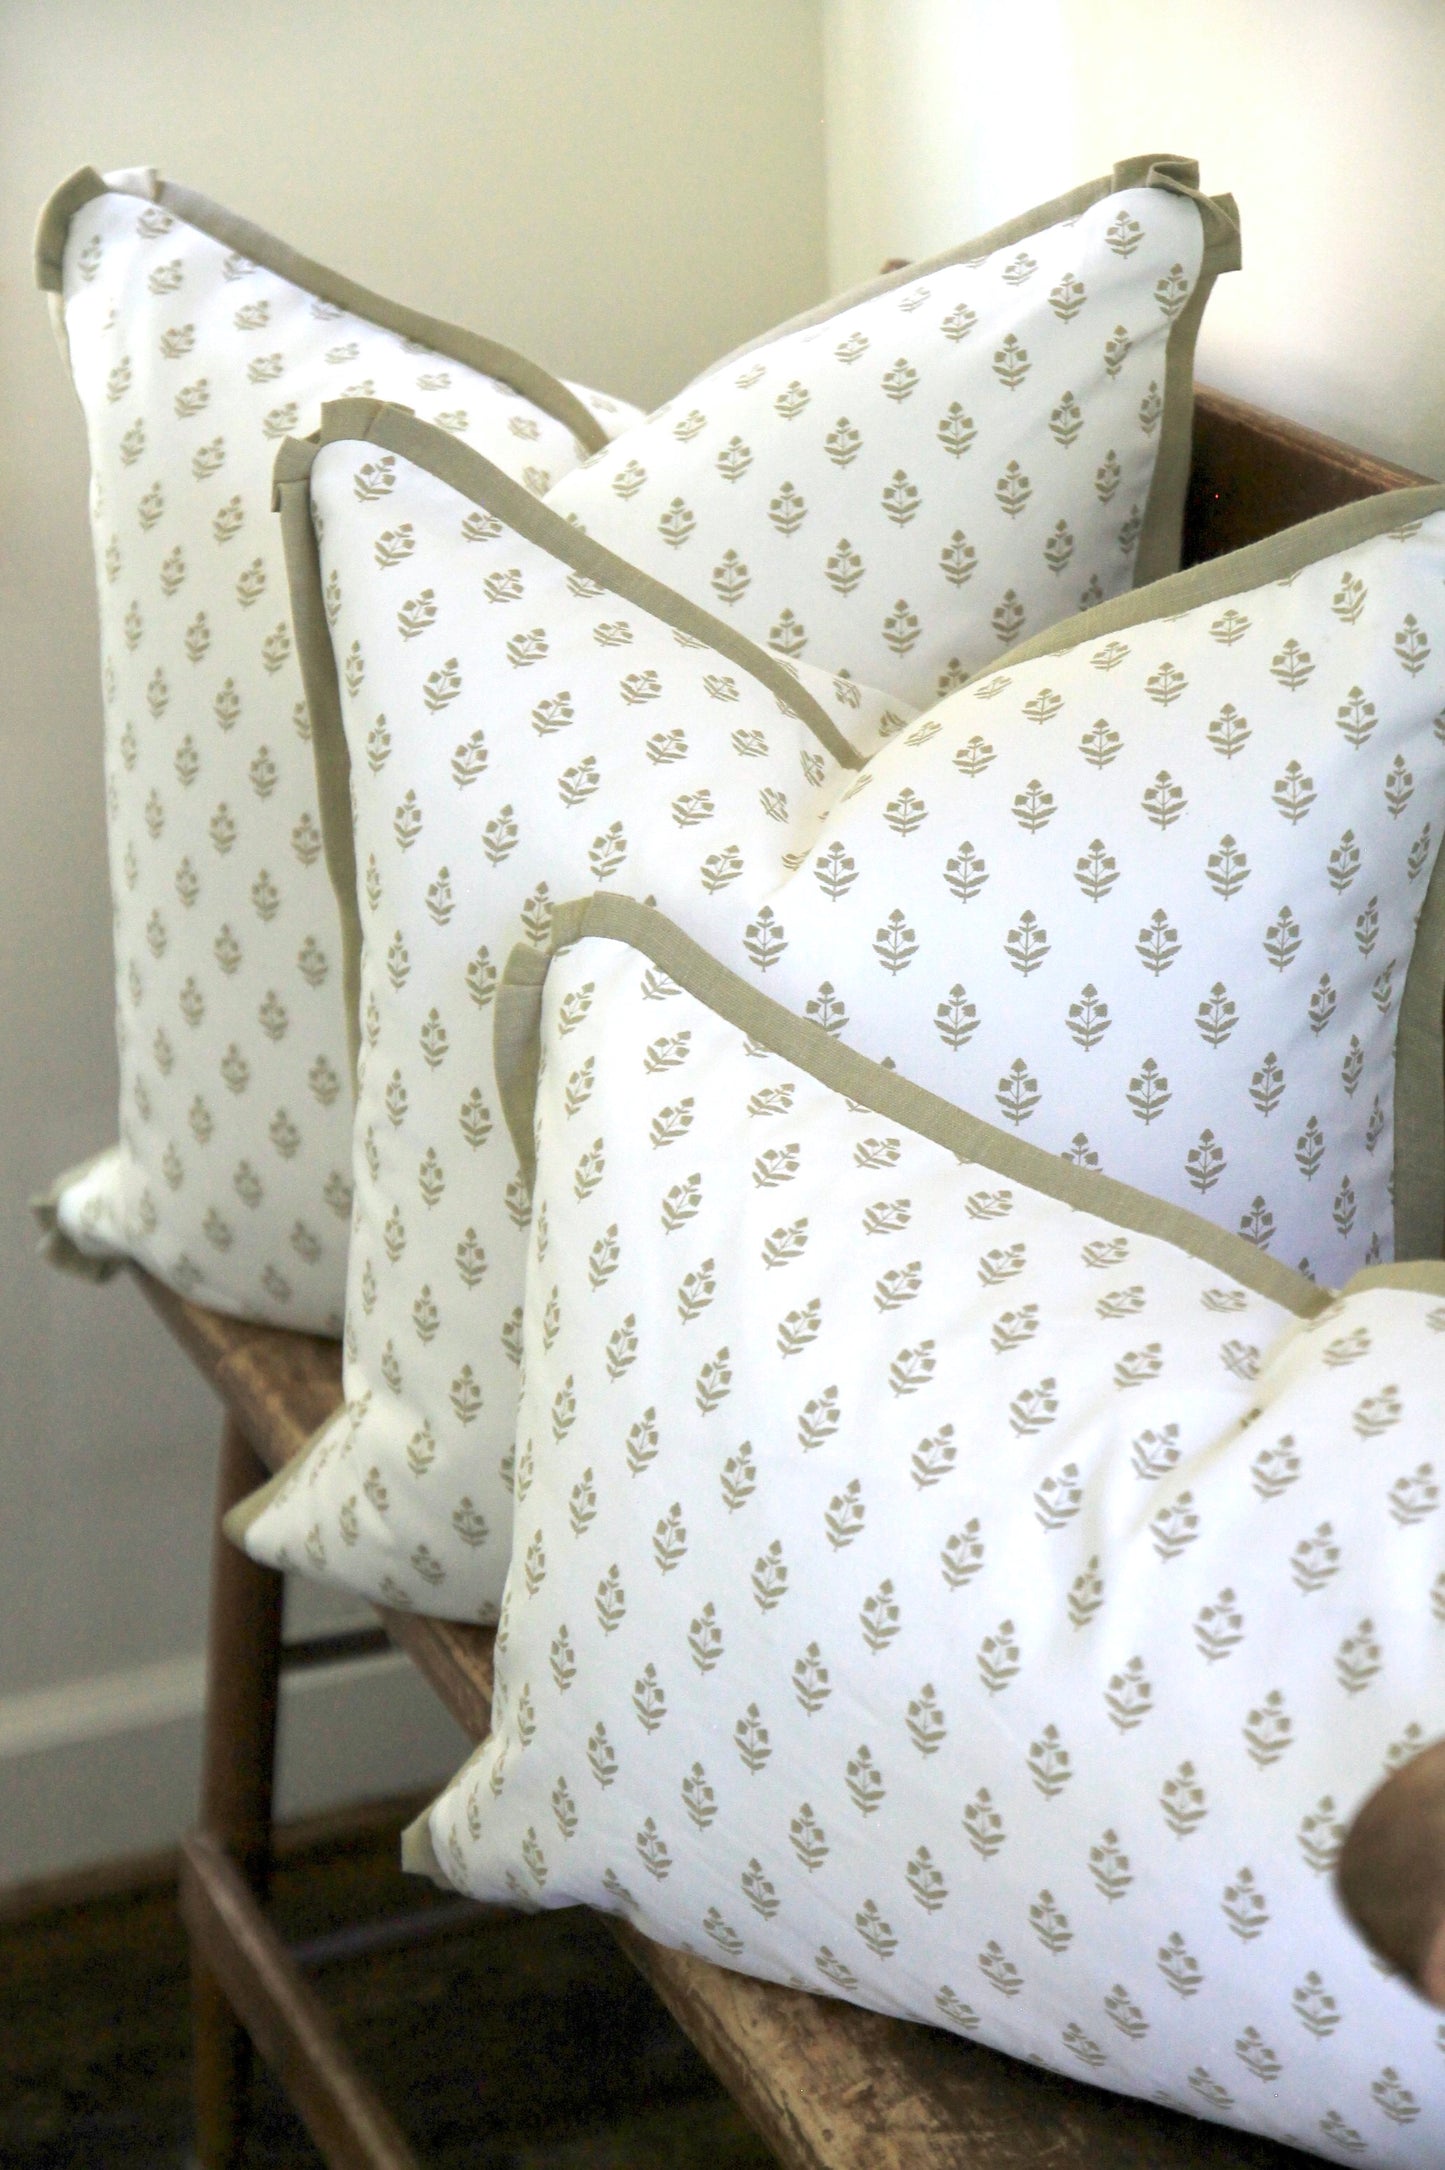 How to Make Flanged Pillow Shams